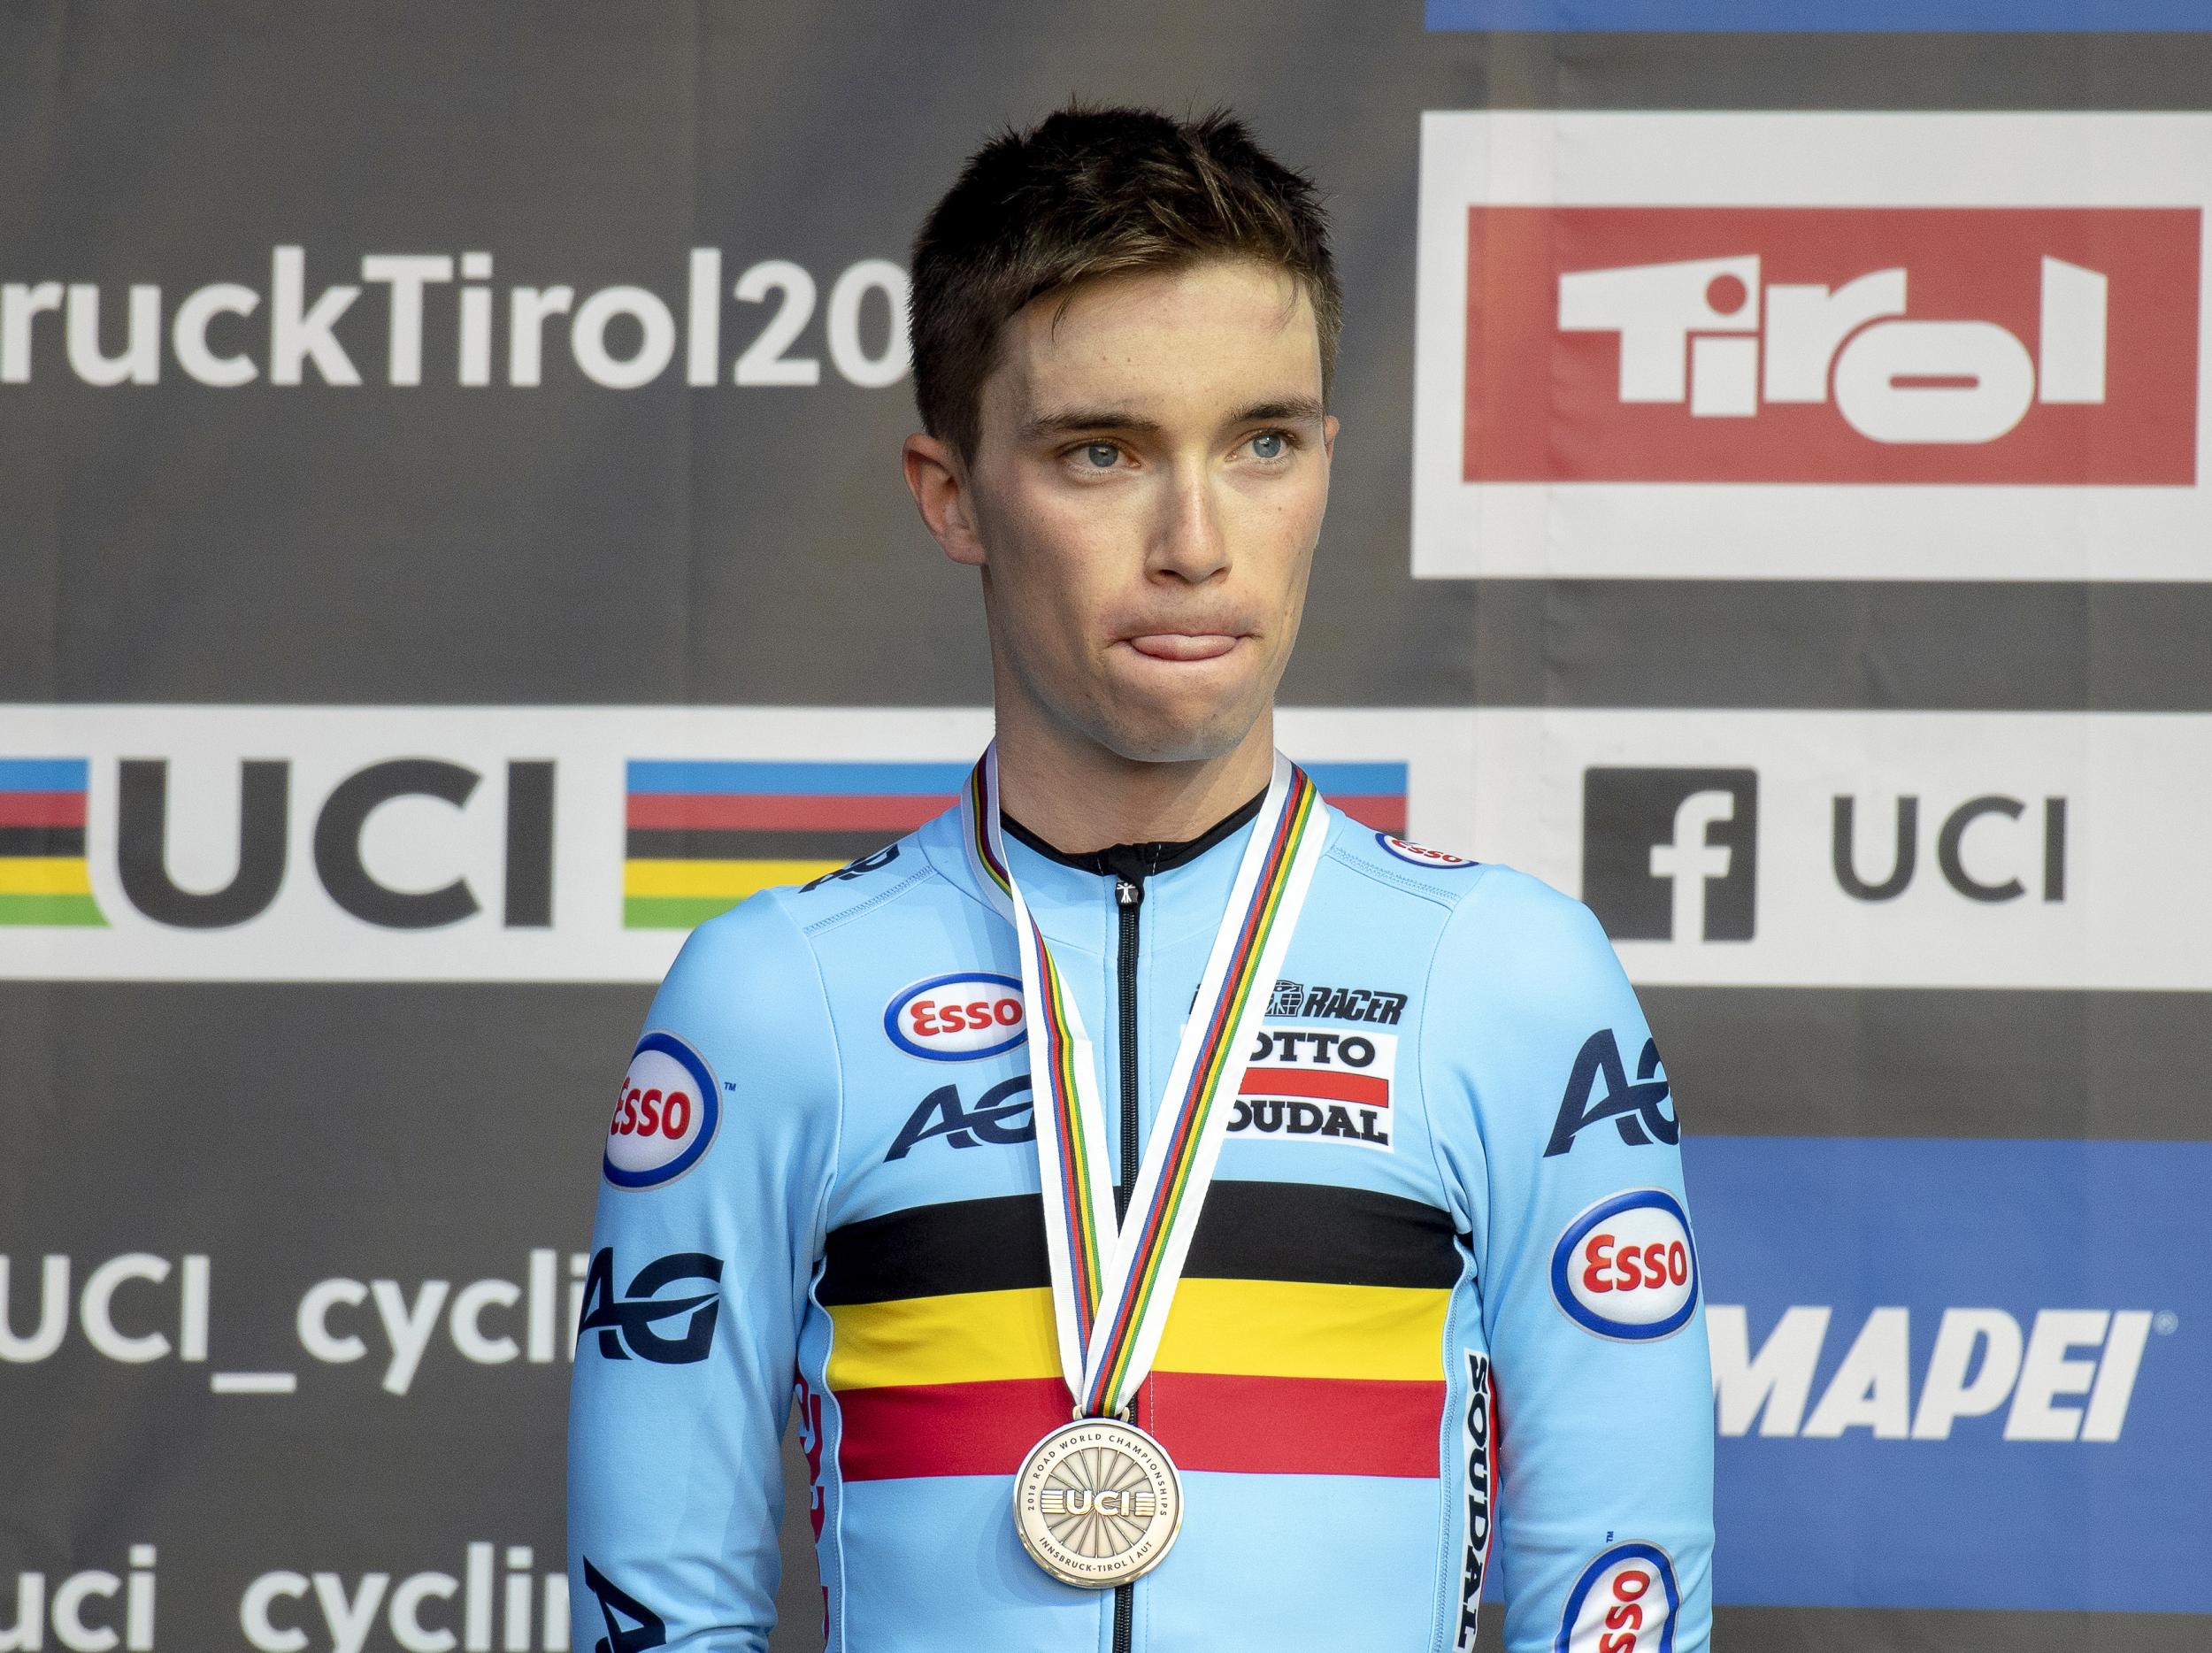 Bjorg Lambrecht was regarded as one of cycling's rising stars